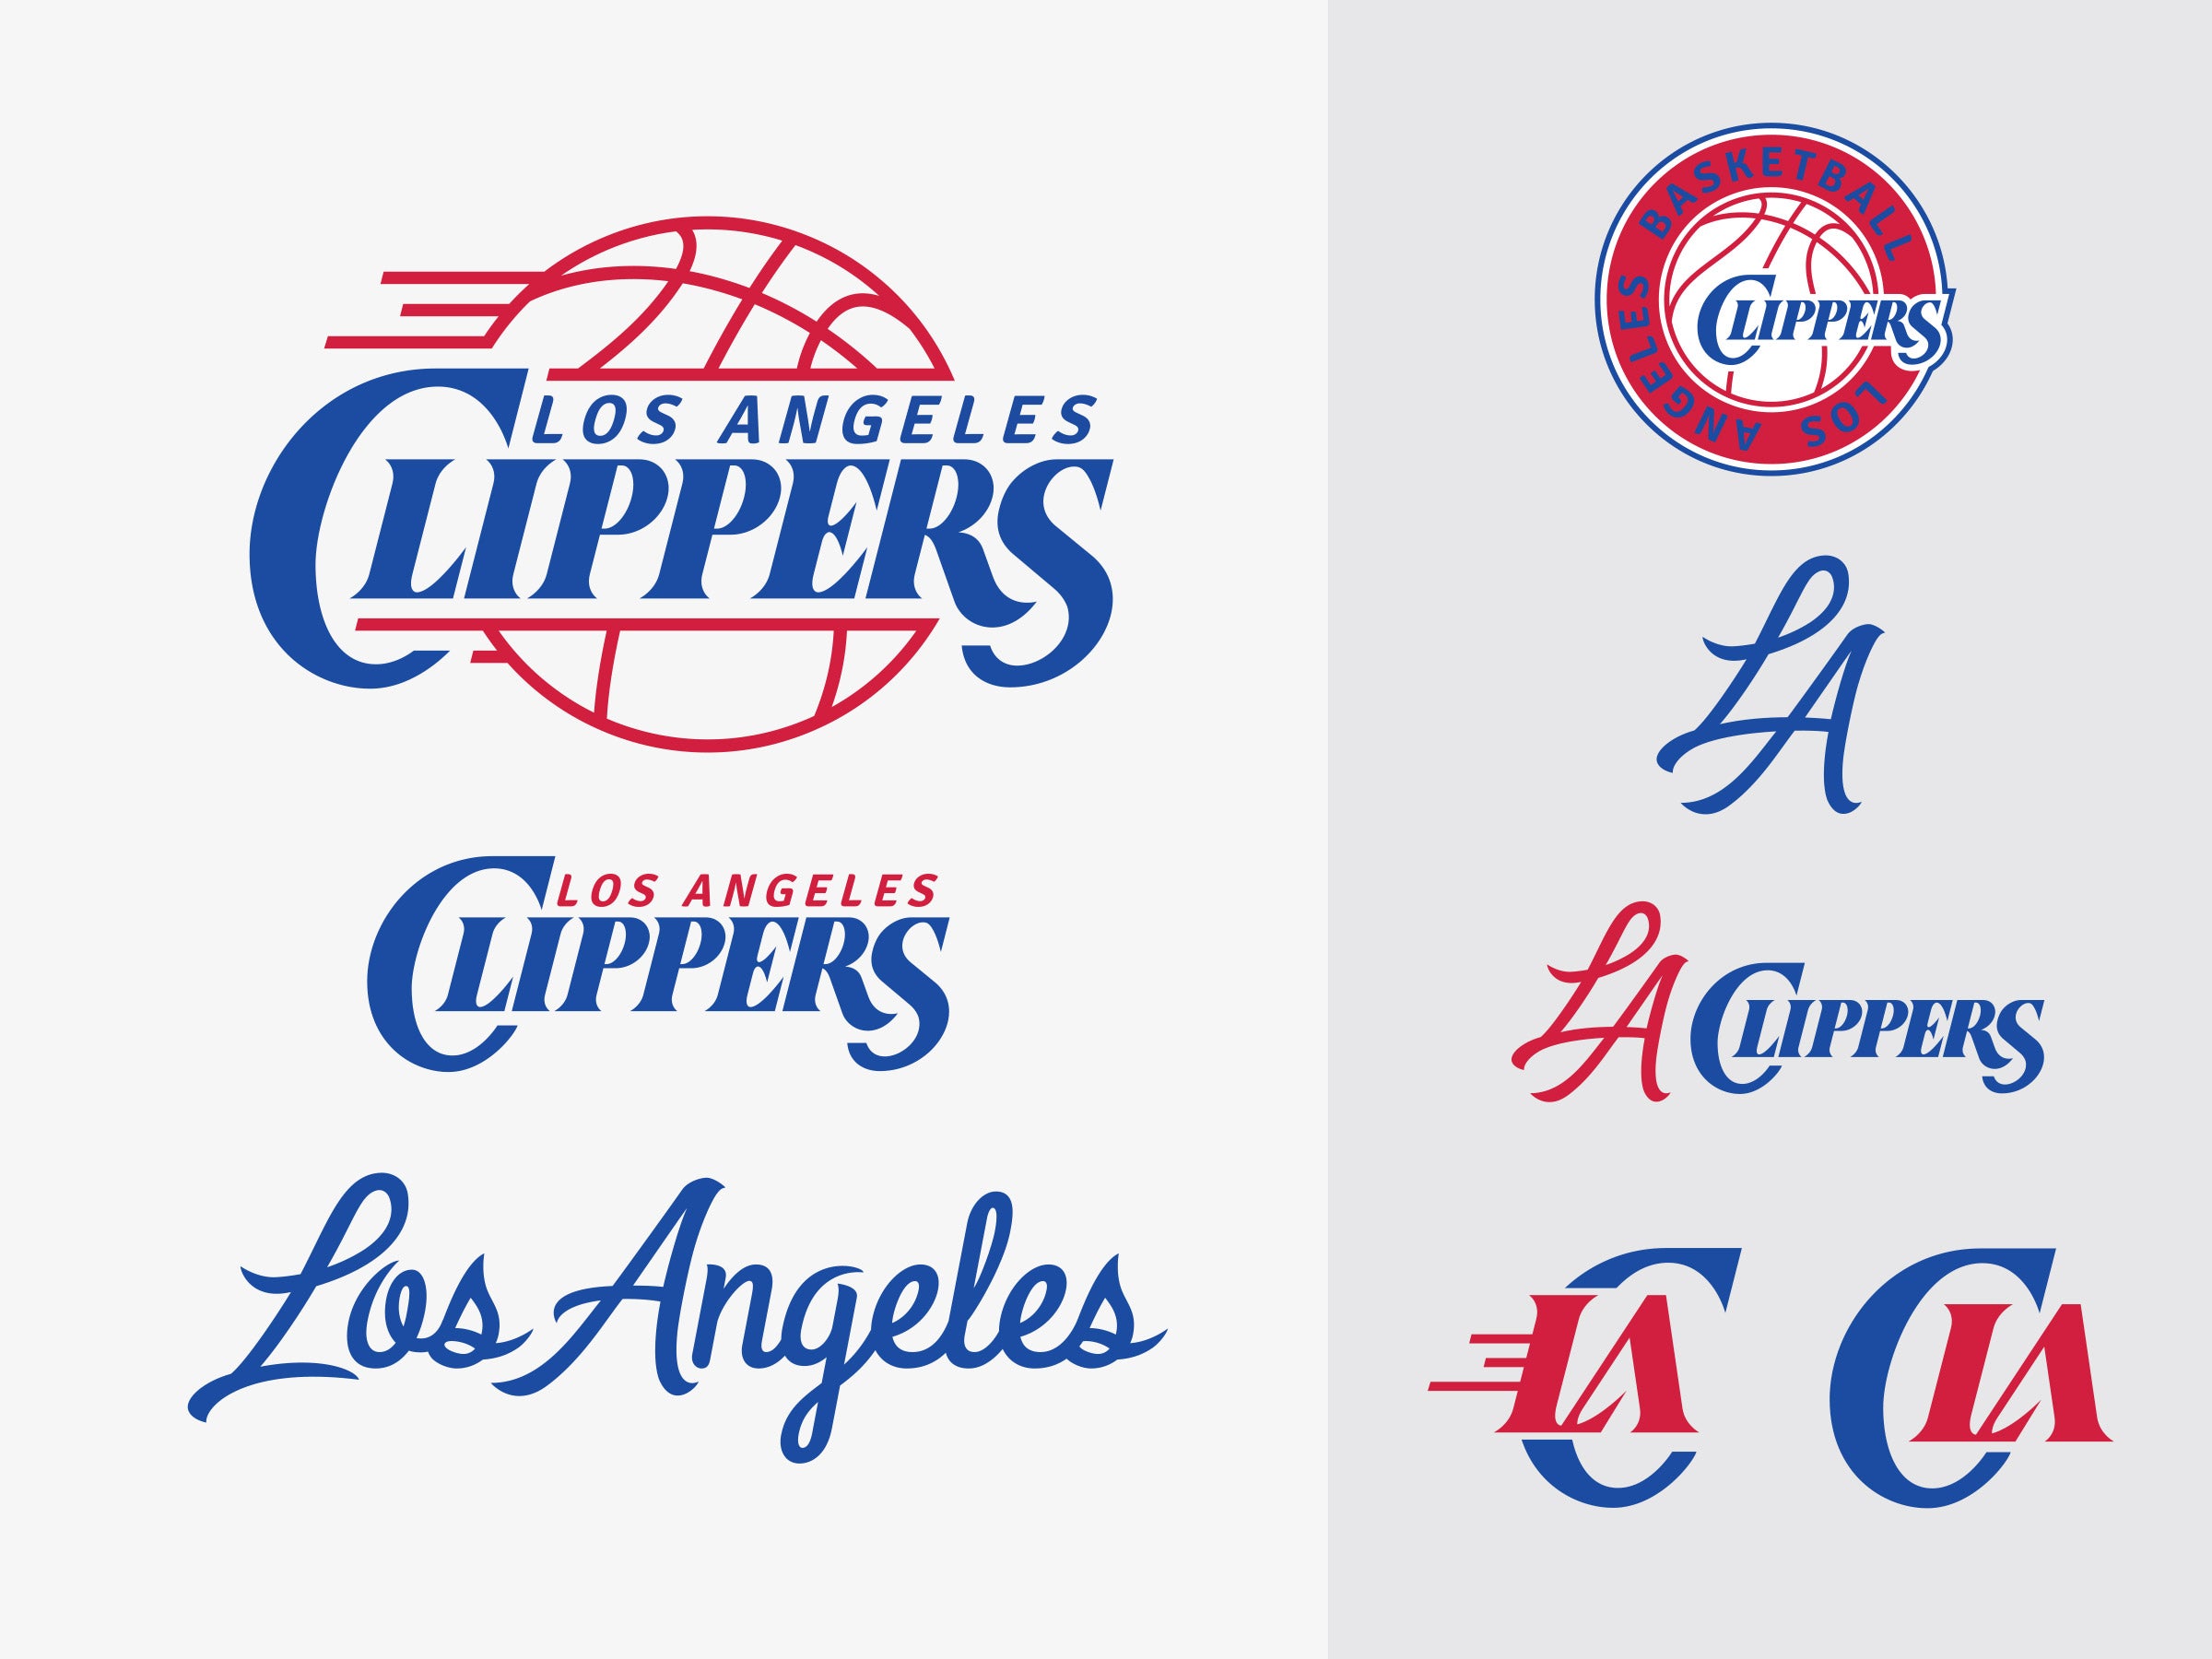 Los Angeles Clippers new logo rebrand